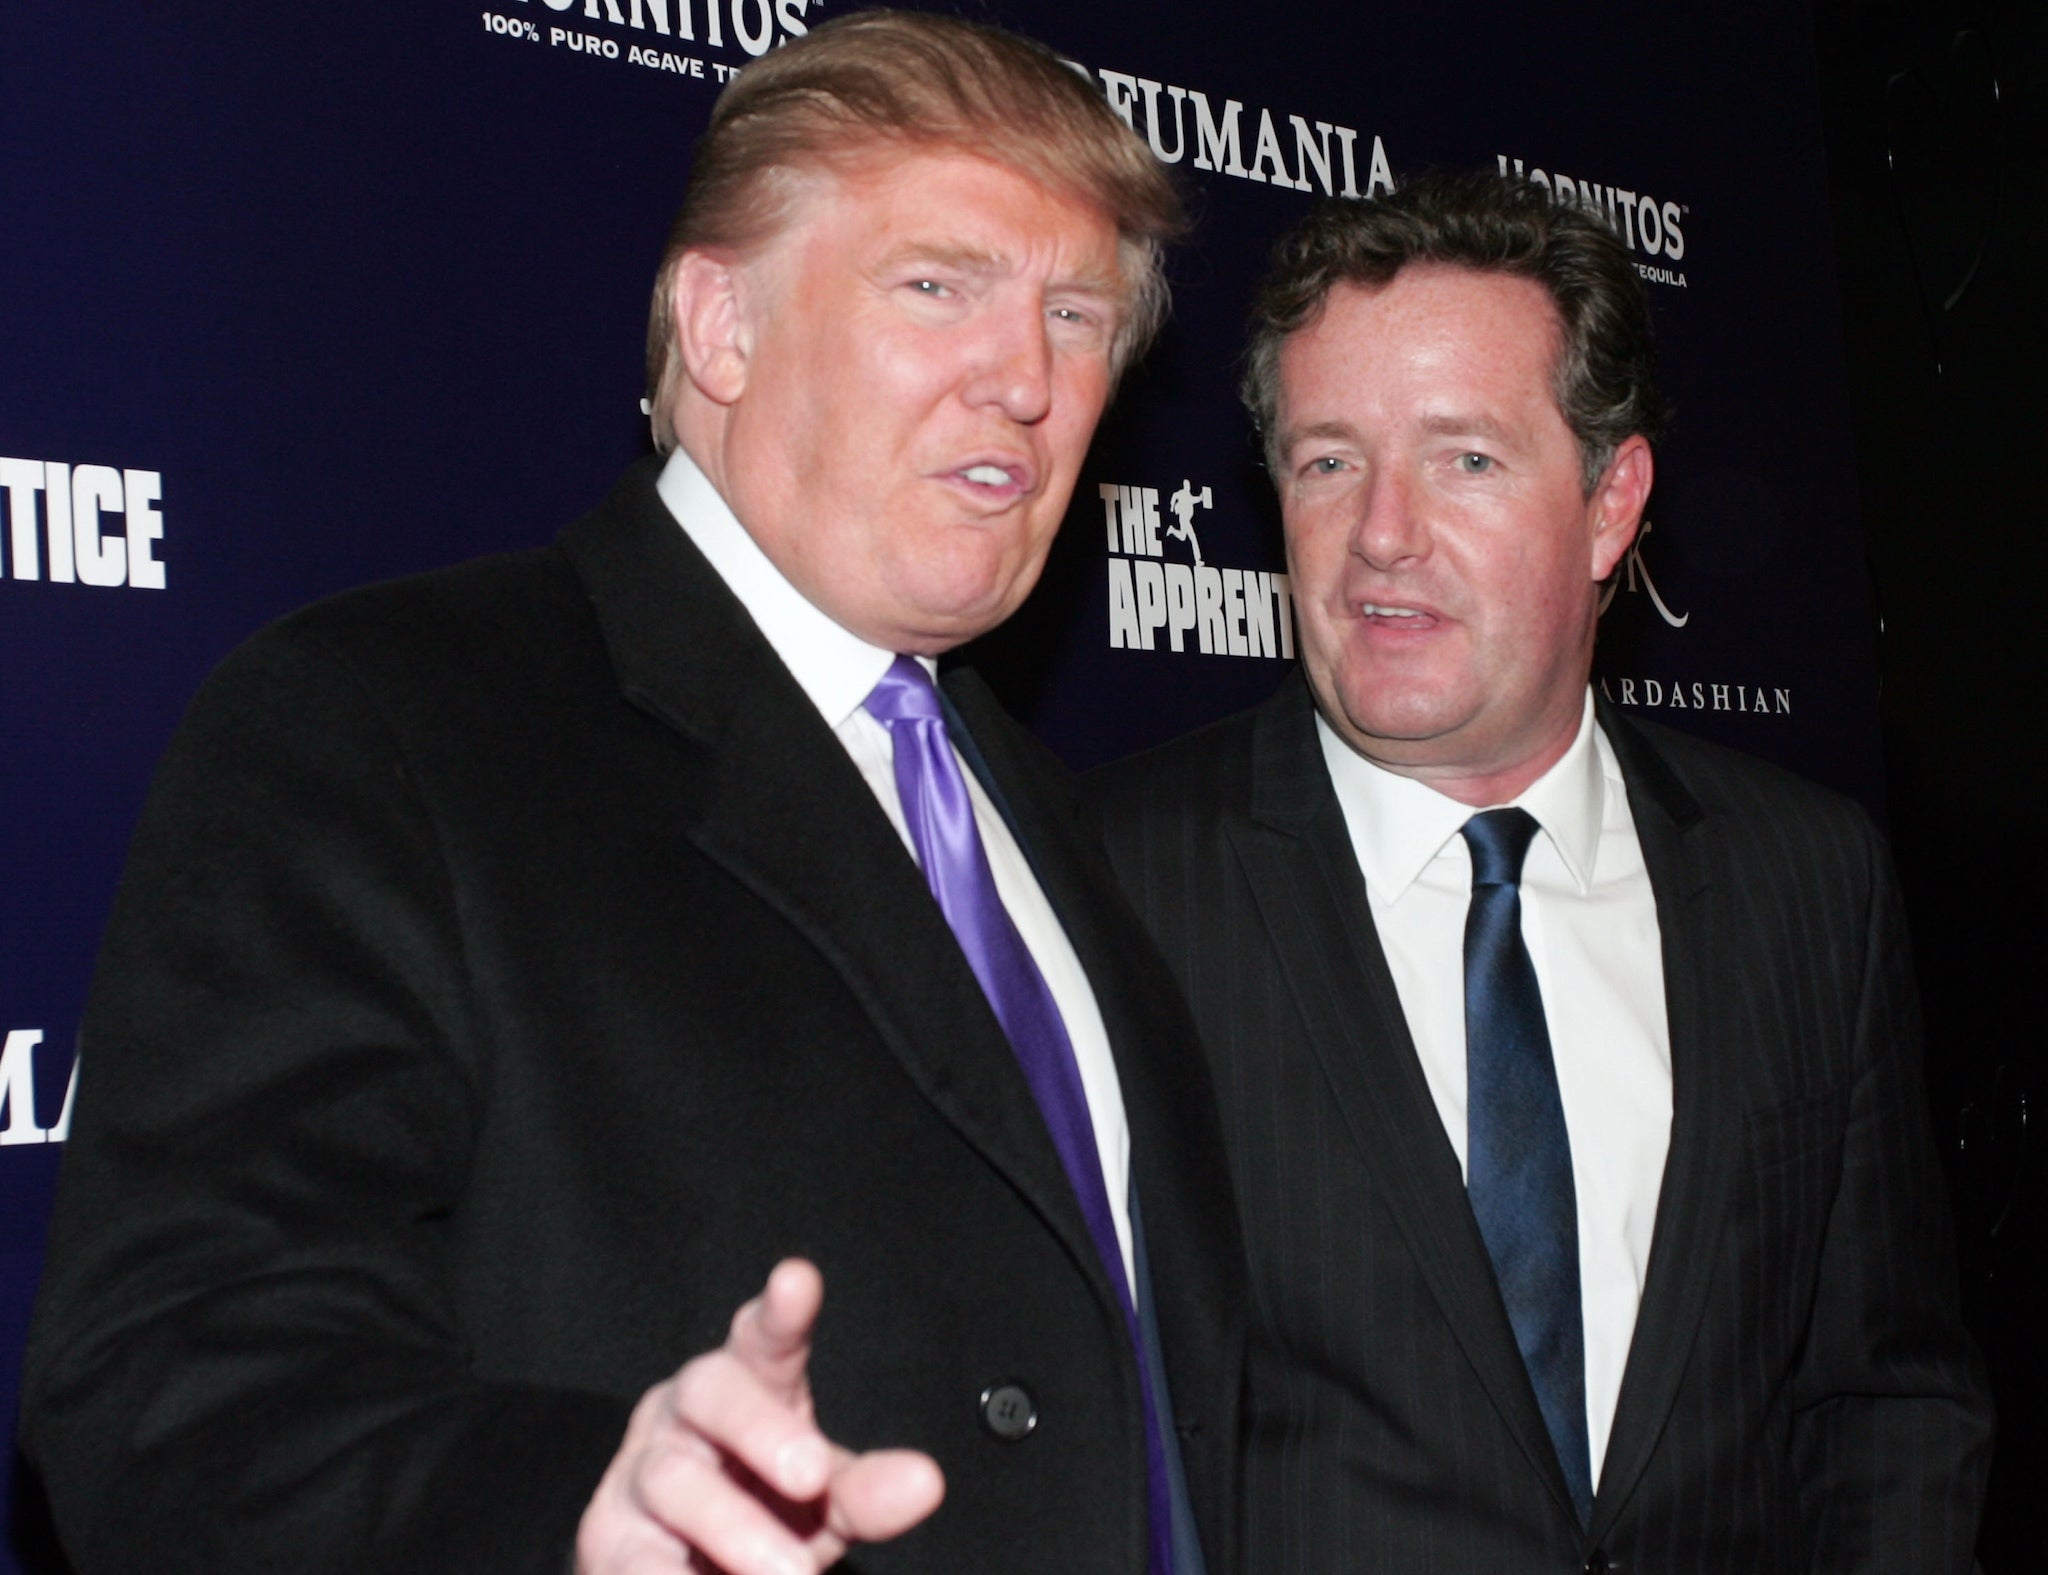 Donald Trump (L) and Piers Morgan celebrate Kim Kardashian's appearance on 'The Apprentice' at Provacateur in New York on November 10, 2010